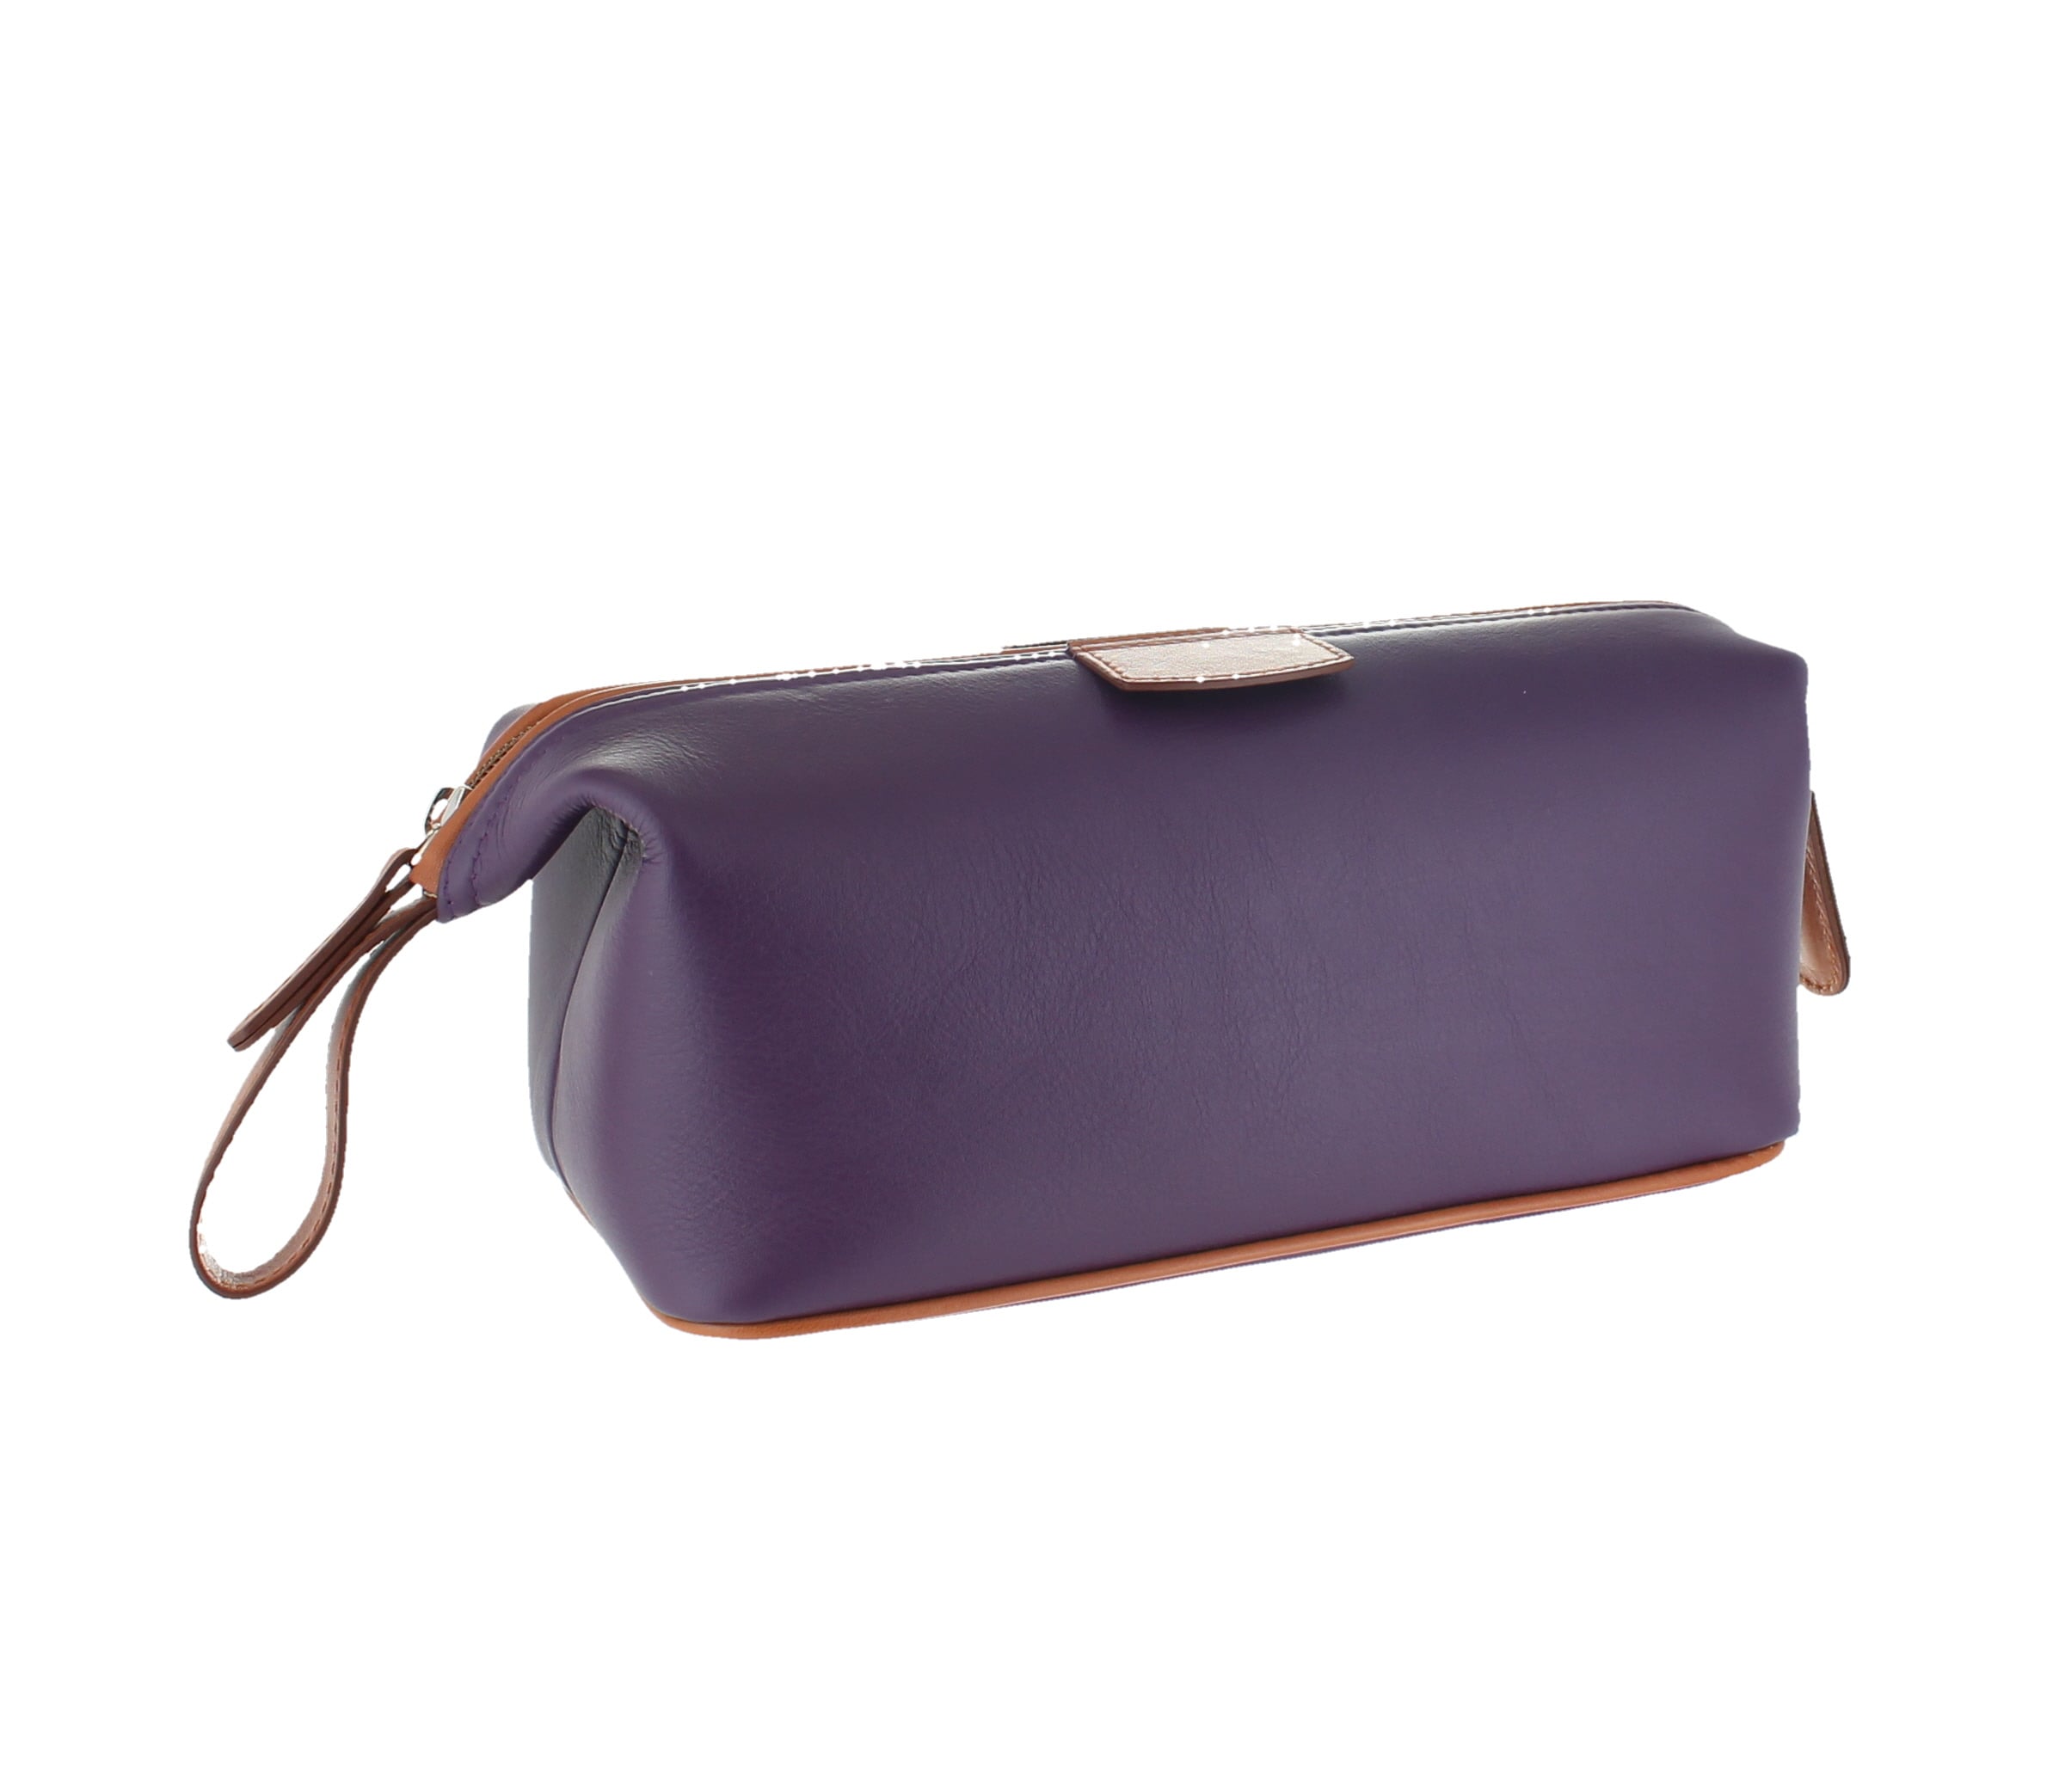 Canvas and Leather Wash Bag - Burgundy D R Harris London